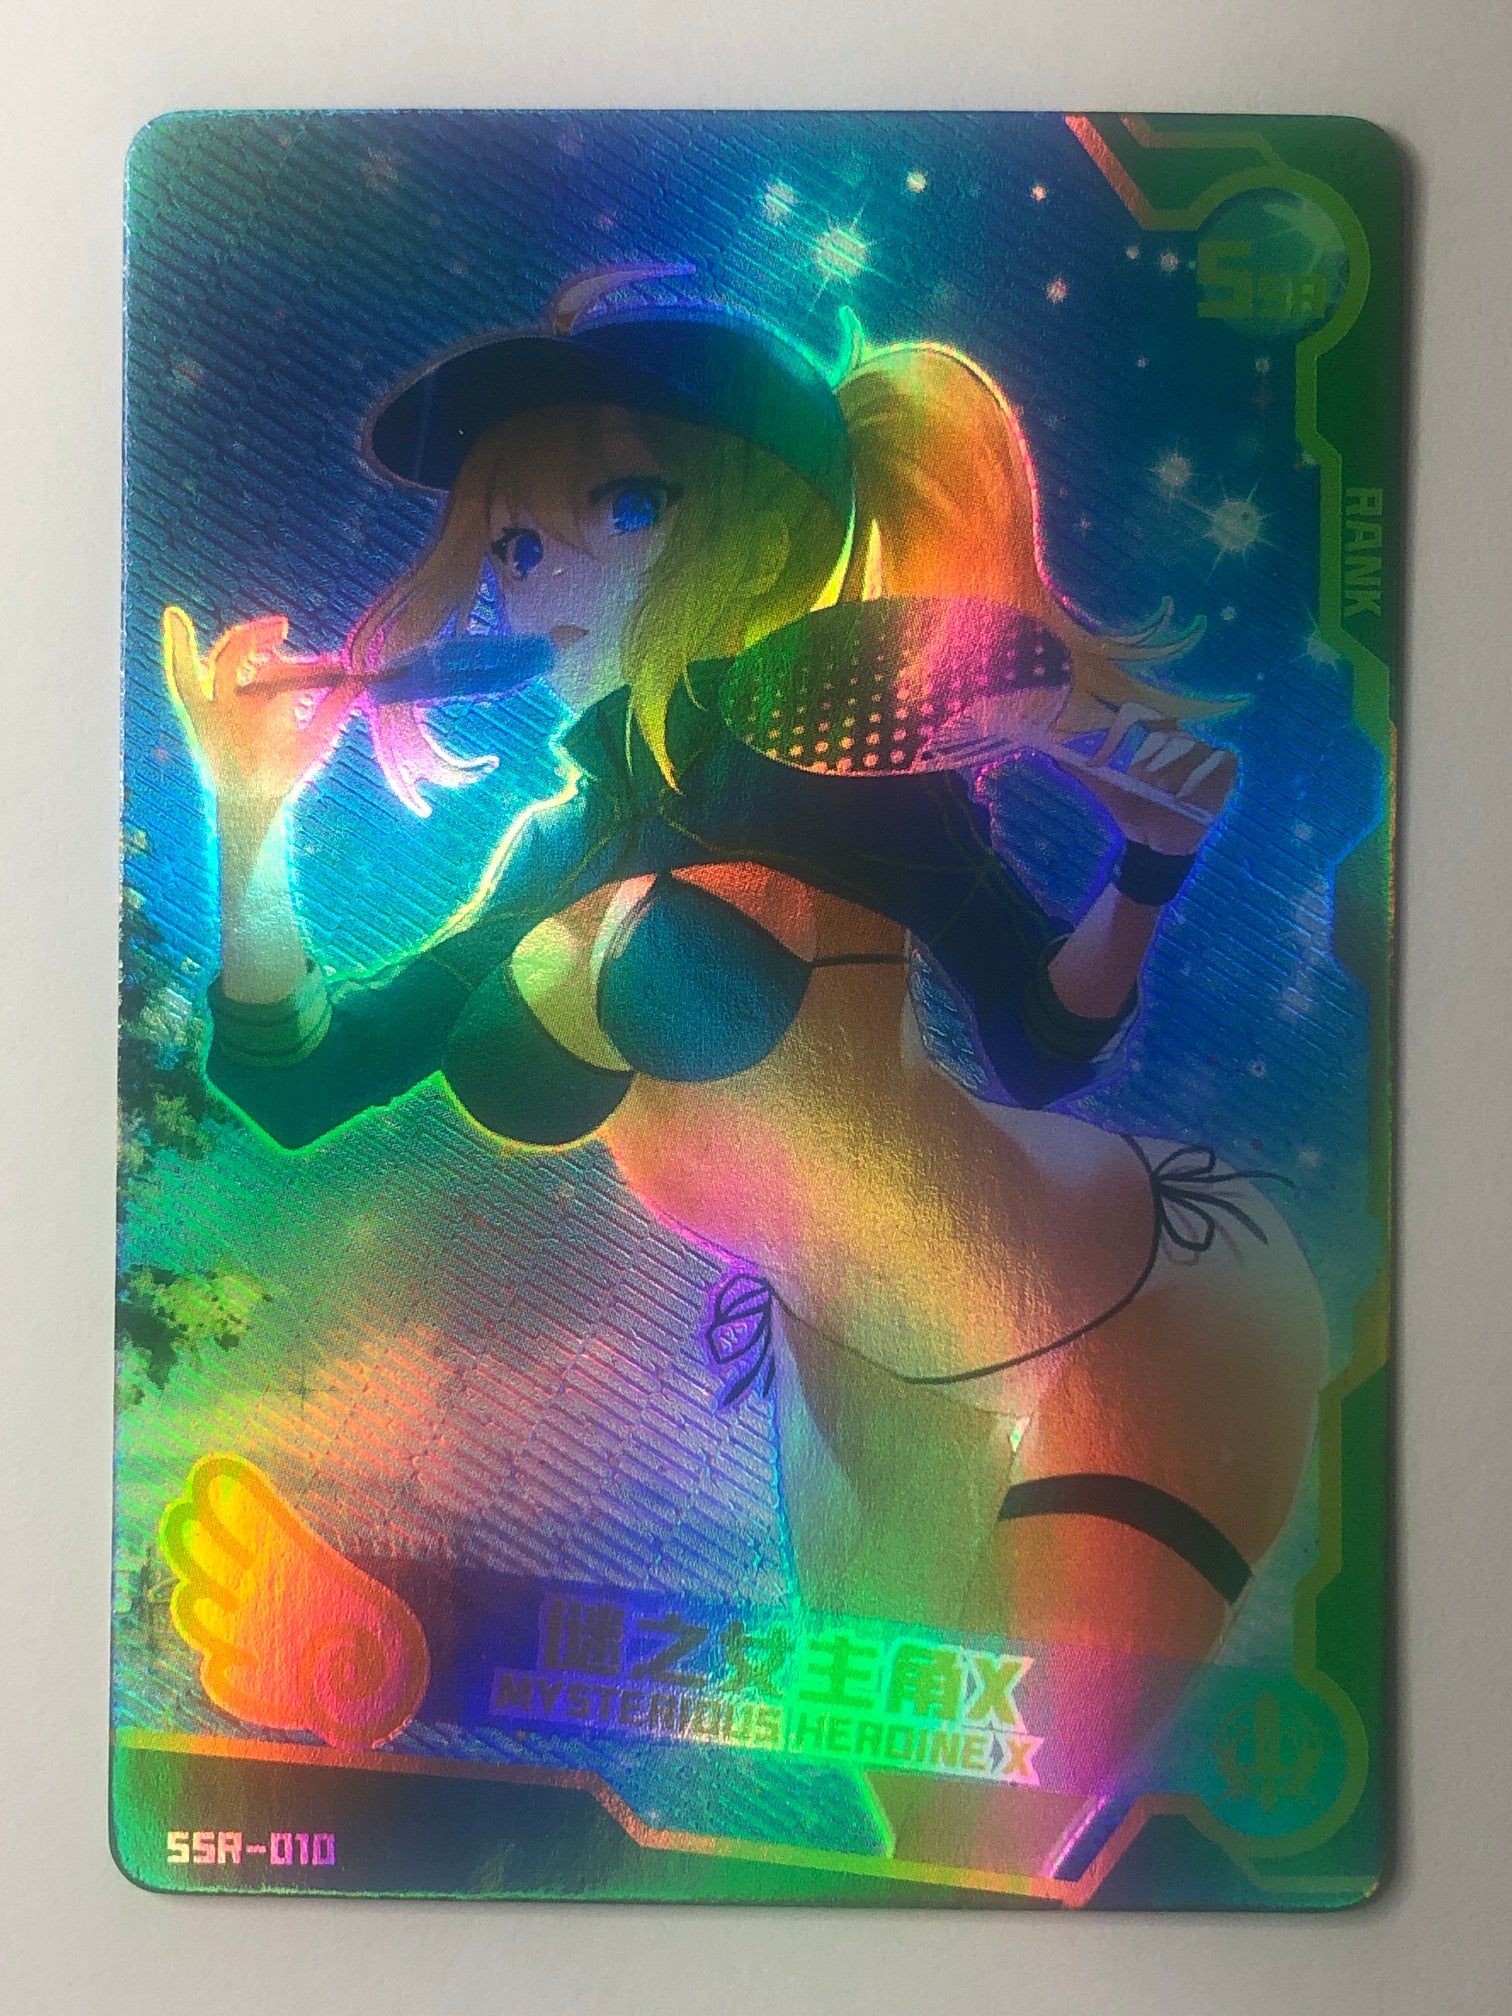 Mysterious Heroine X - SSR-010 - Maiden Party SNPD (M/NM)